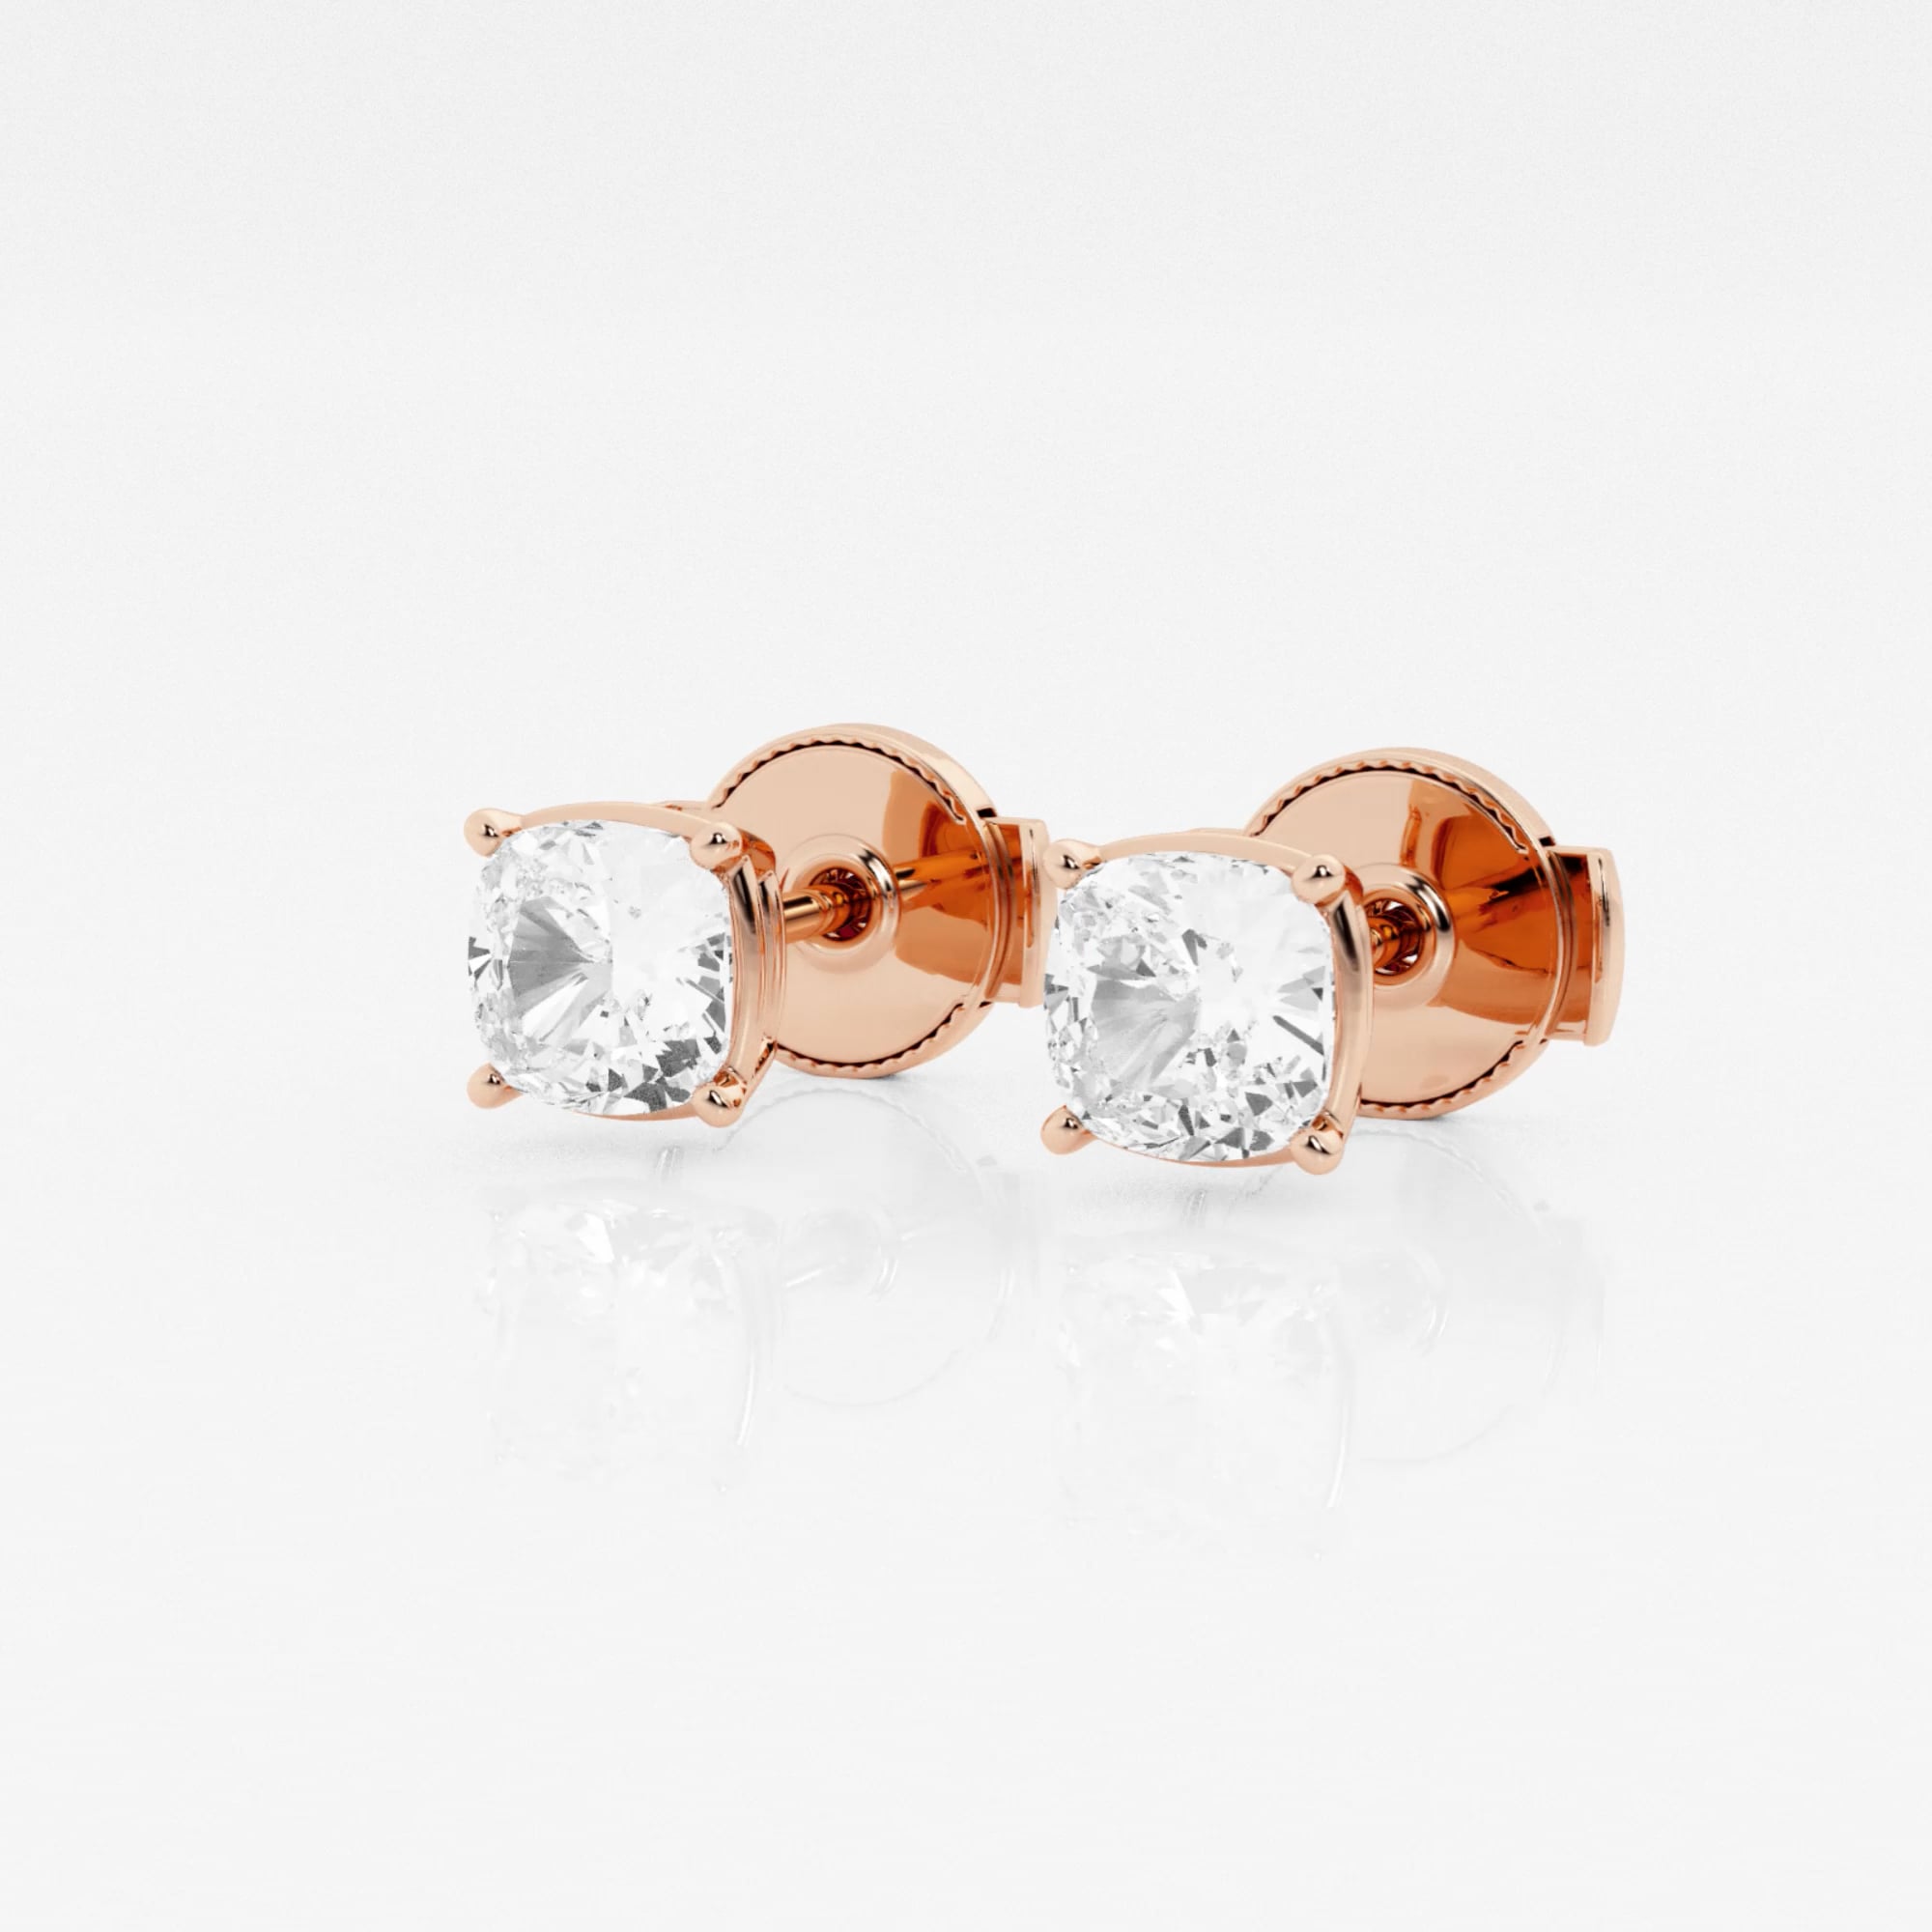 product video for 1 ctw Cushion Lab Grown Diamond Solitaire Stud Earrings